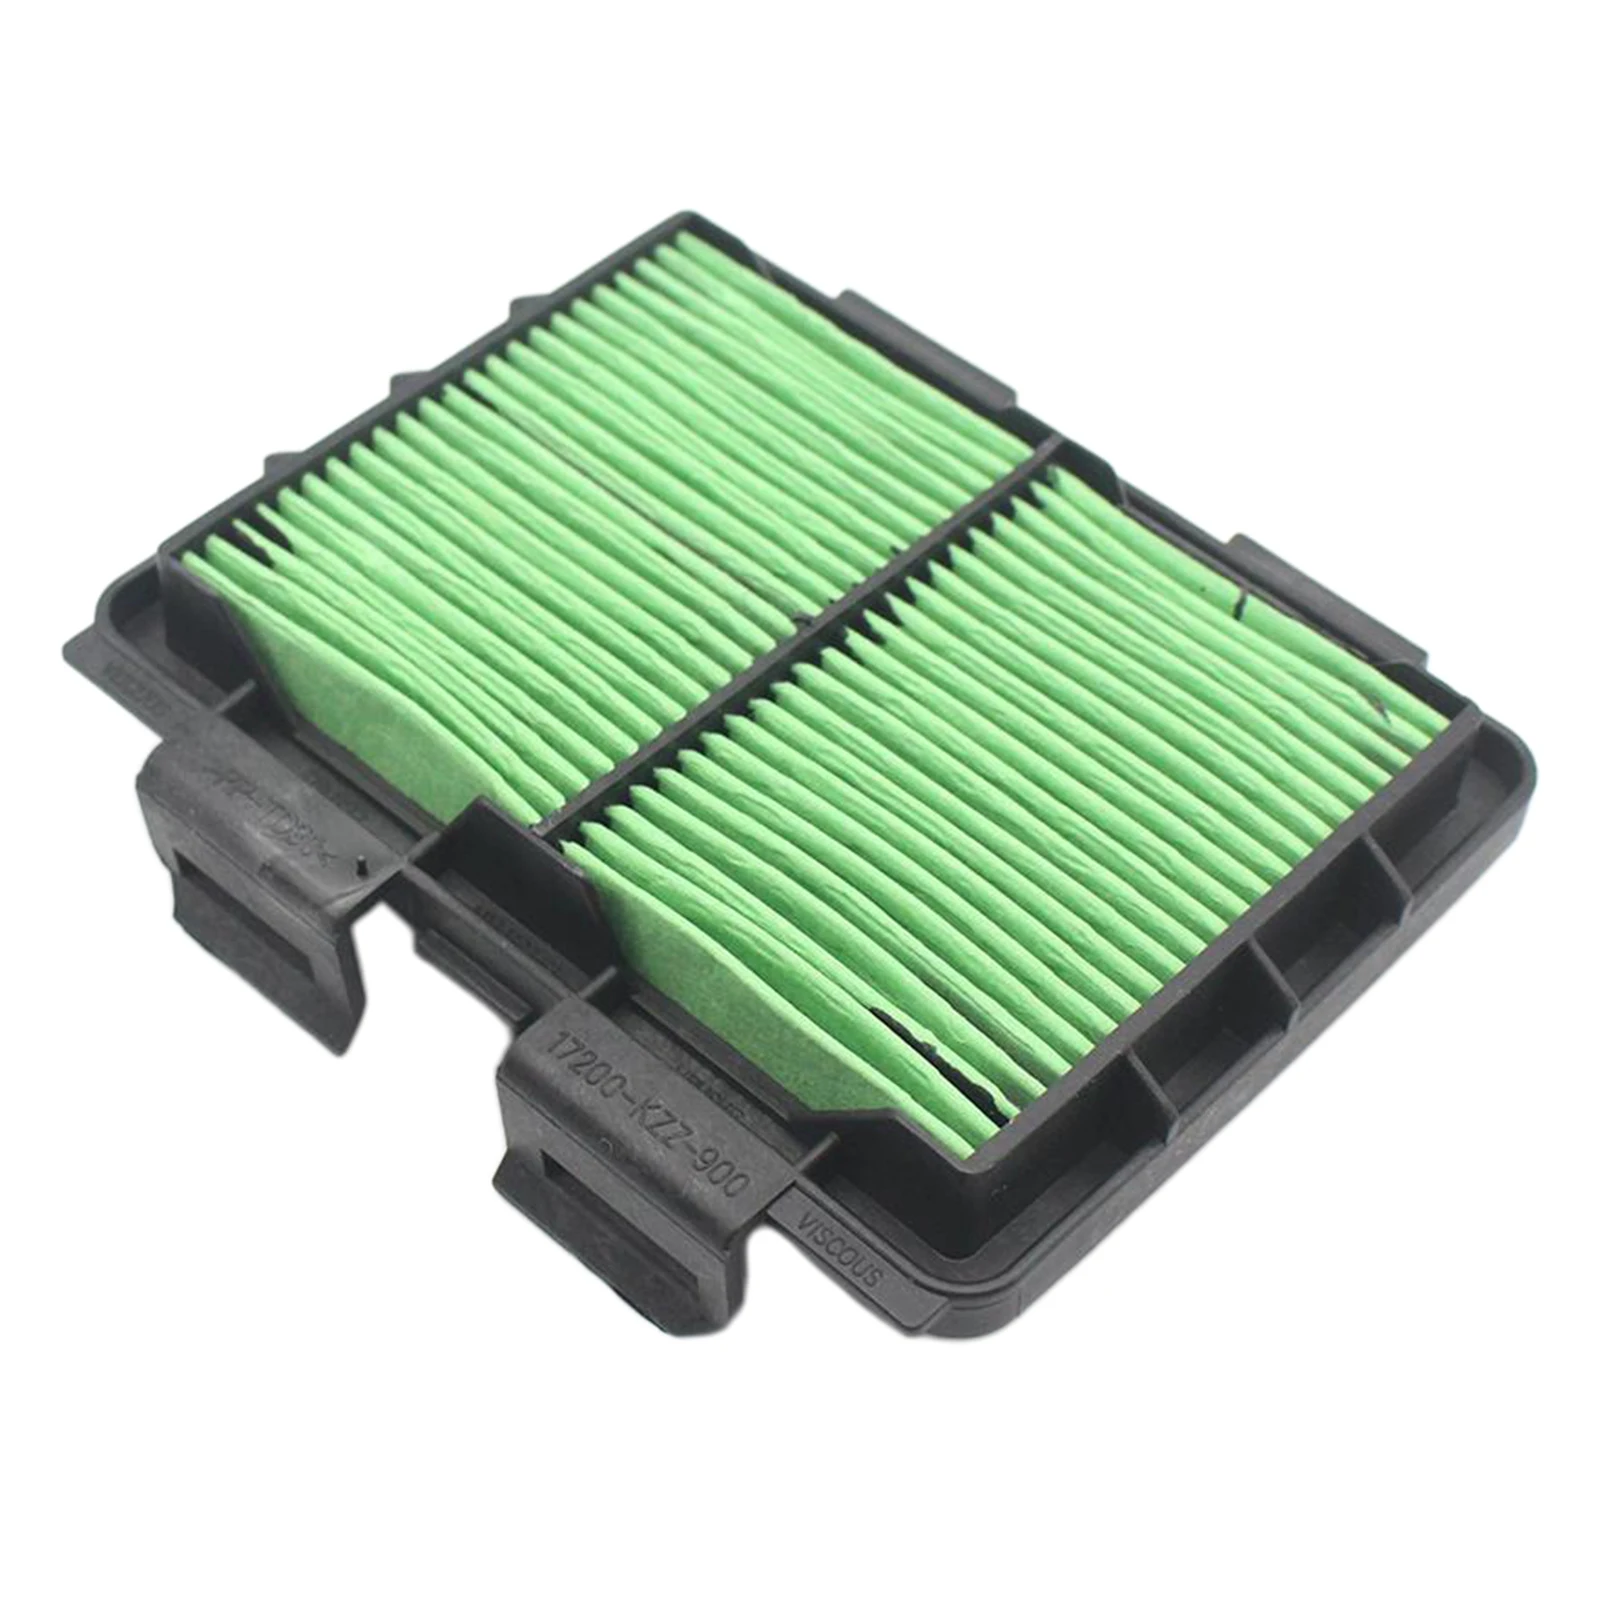 Motorcycle Air Filter Cleaner Replaces fits for HONDA CRF250L CRF250 2013 -2016, Professional Accessories